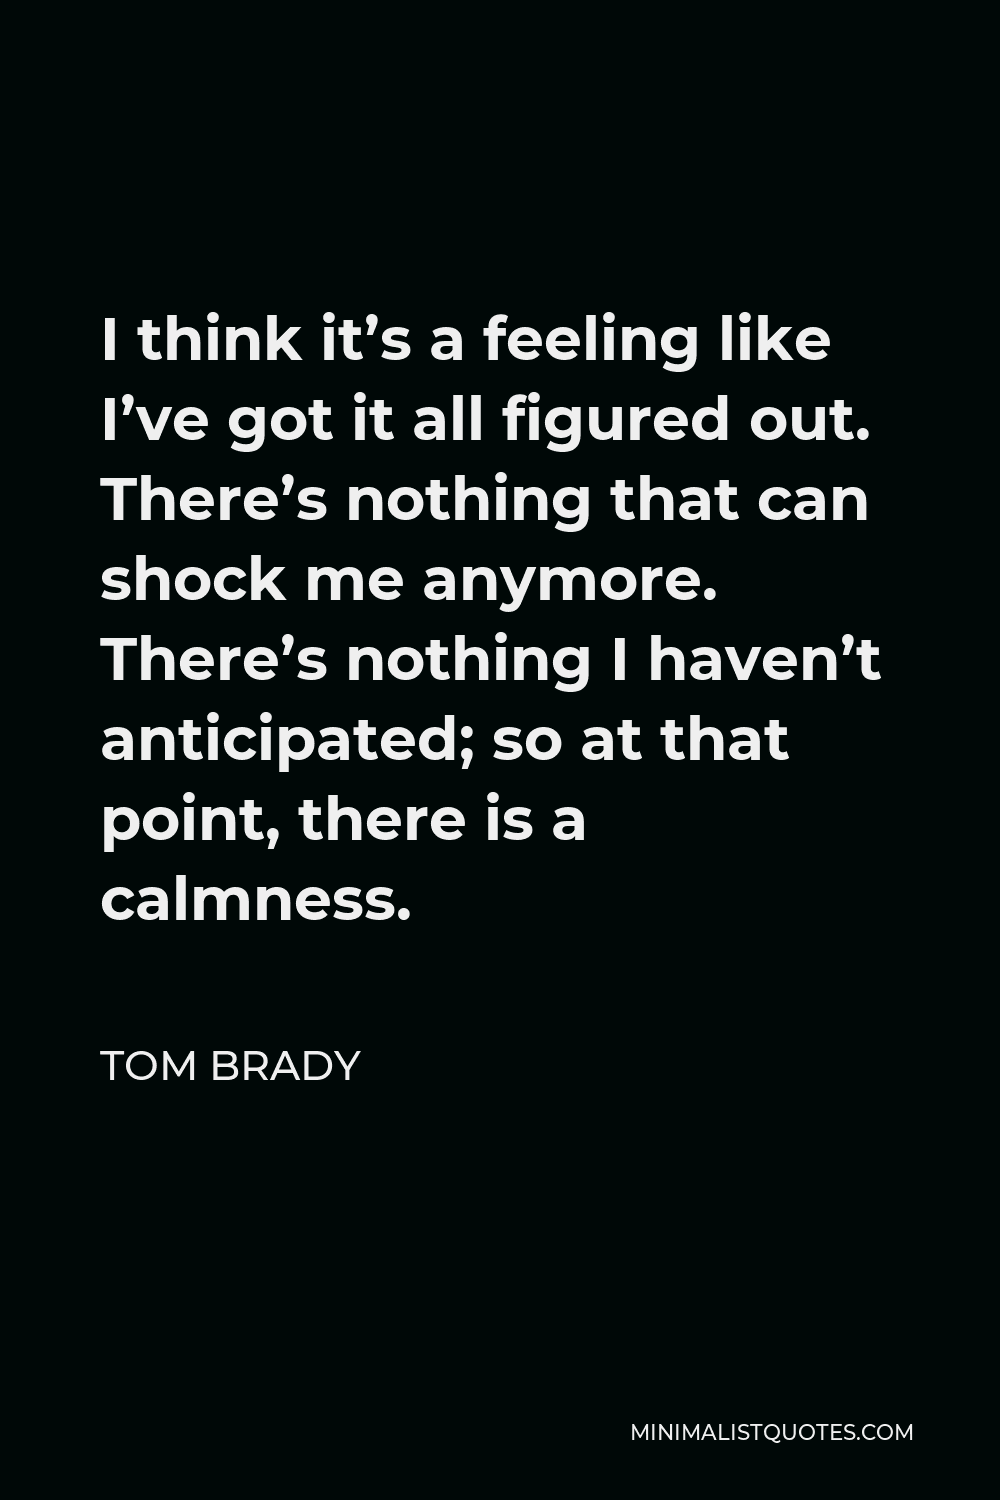 Tom Brady Quote - I think it’s a feeling like I’ve got it all figured out. There’s nothing that can shock me anymore. There’s nothing I haven’t anticipated; so at that point, there is a calmness.